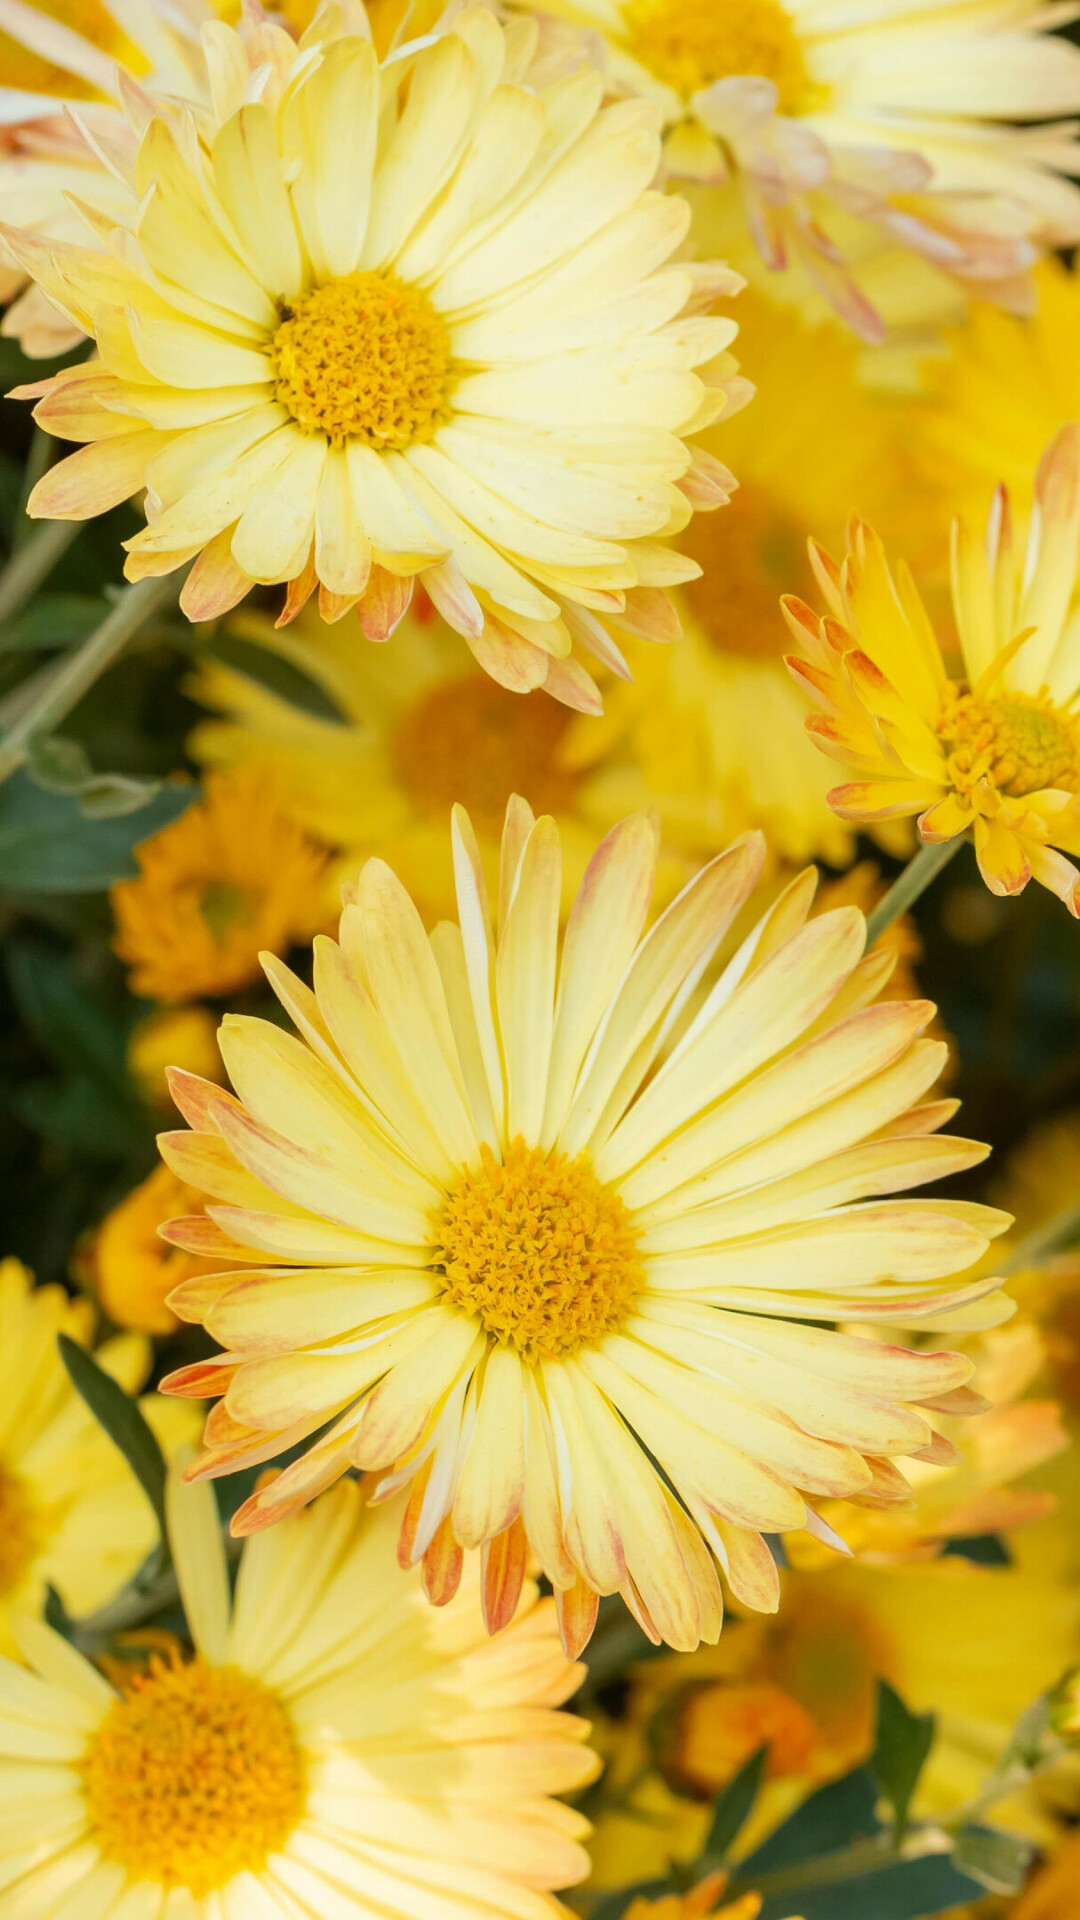 Chrysanthemum: Cultivated species often are called mums and these tend to have large, radiate flower heads versus smaller flower heads in wild species. 1080x1920 Full HD Background.